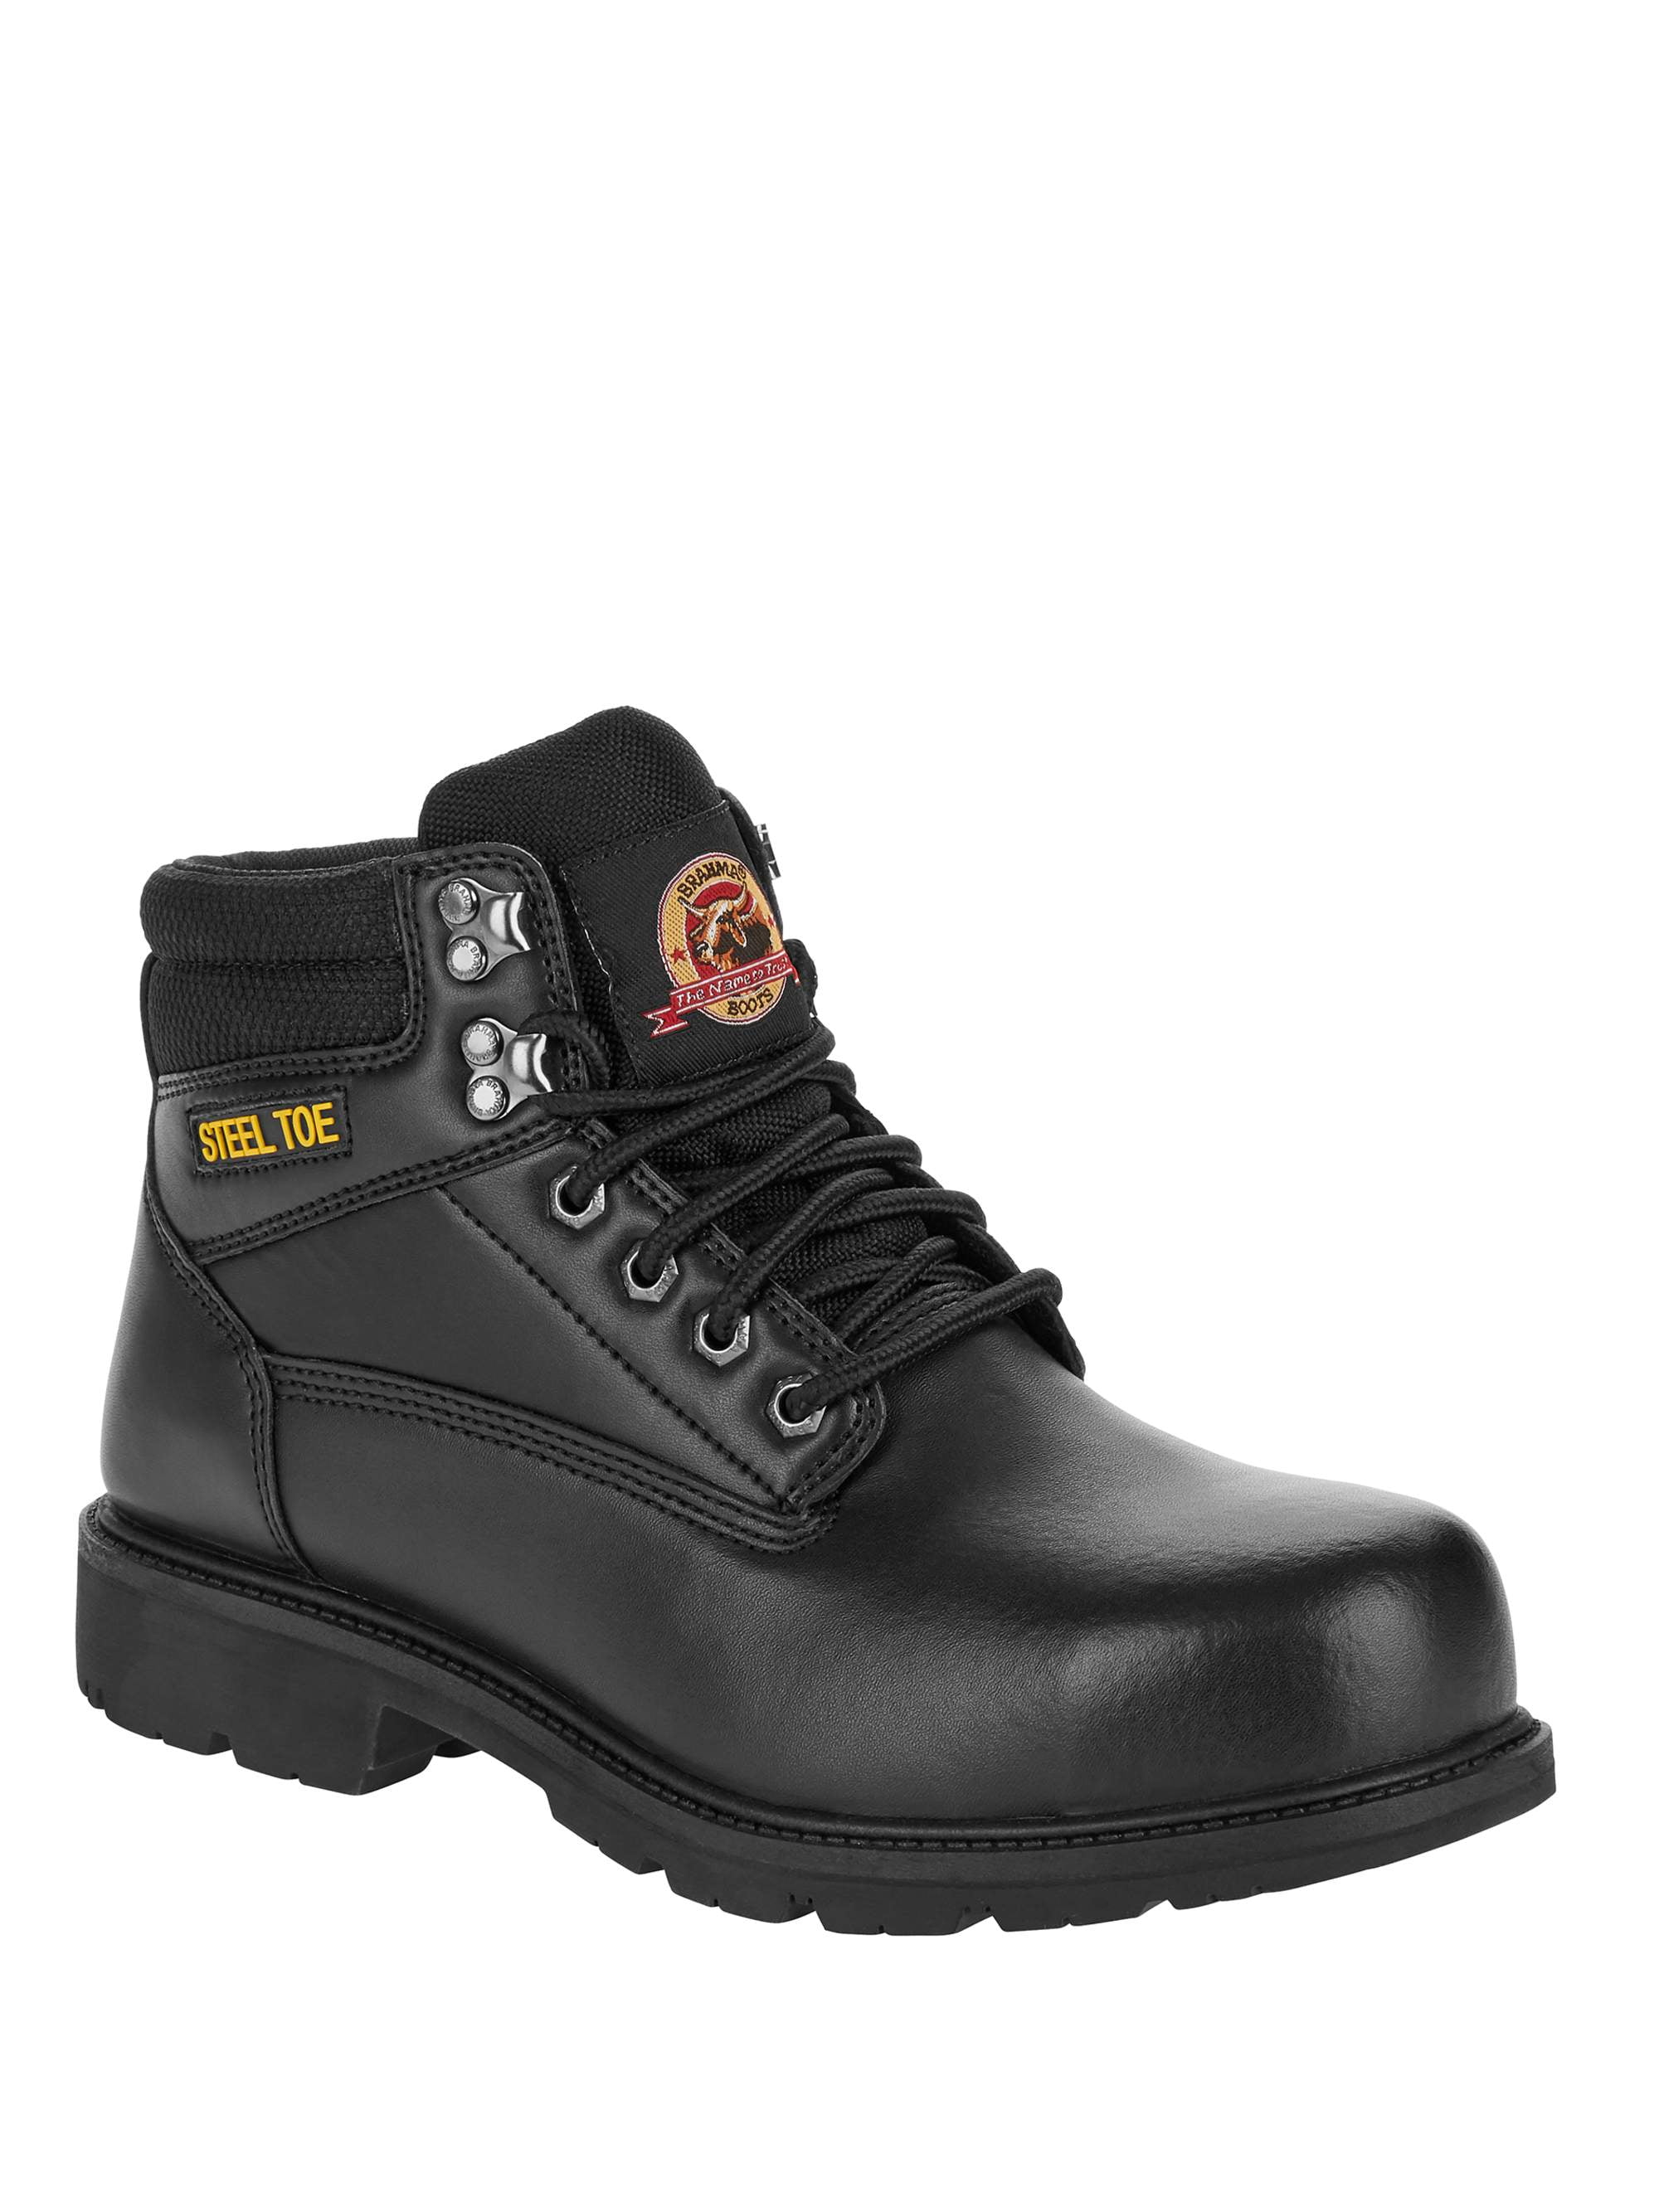 Dickies Men's Escape Mid-Top Leather Industrial and Construction Shoe ASTM Black 